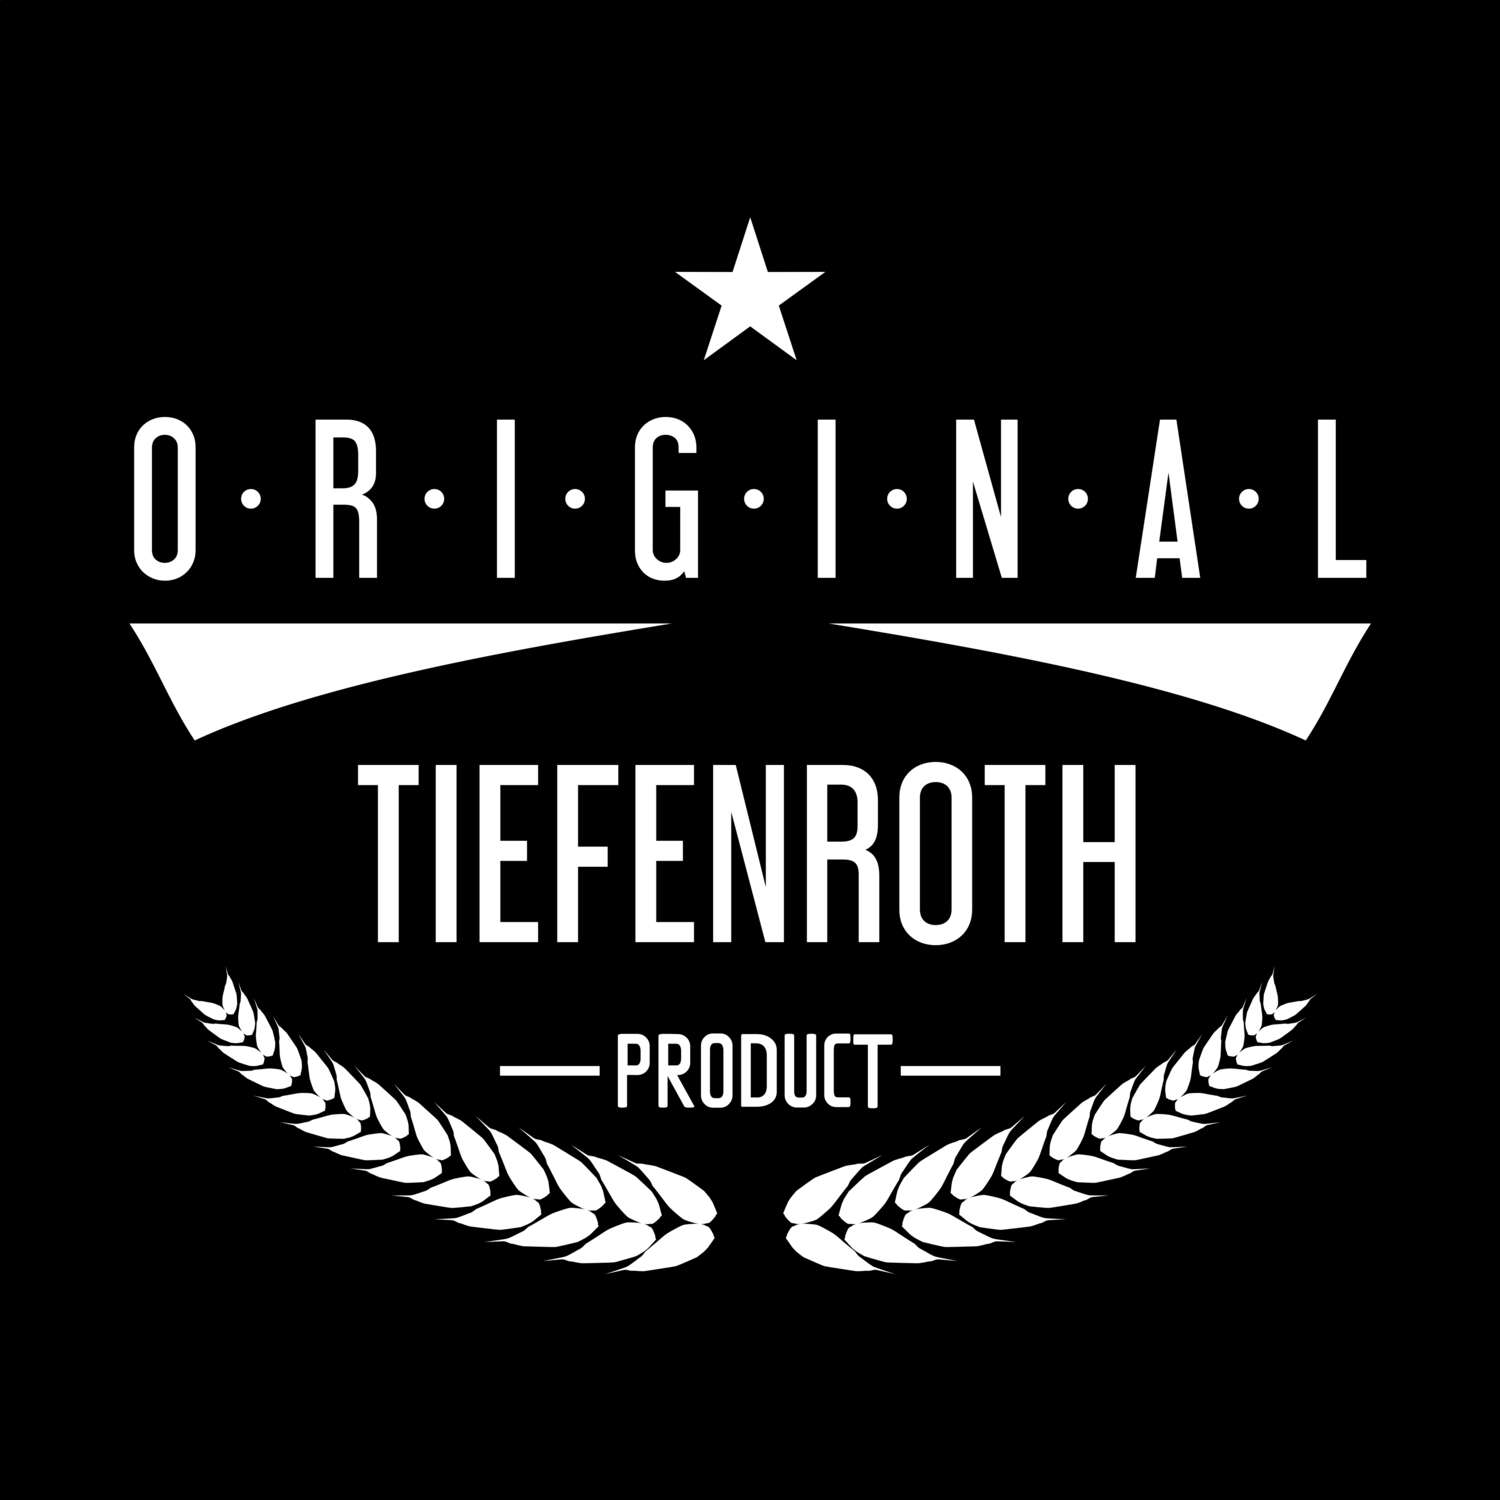 Tiefenroth T-Shirt »Original Product«